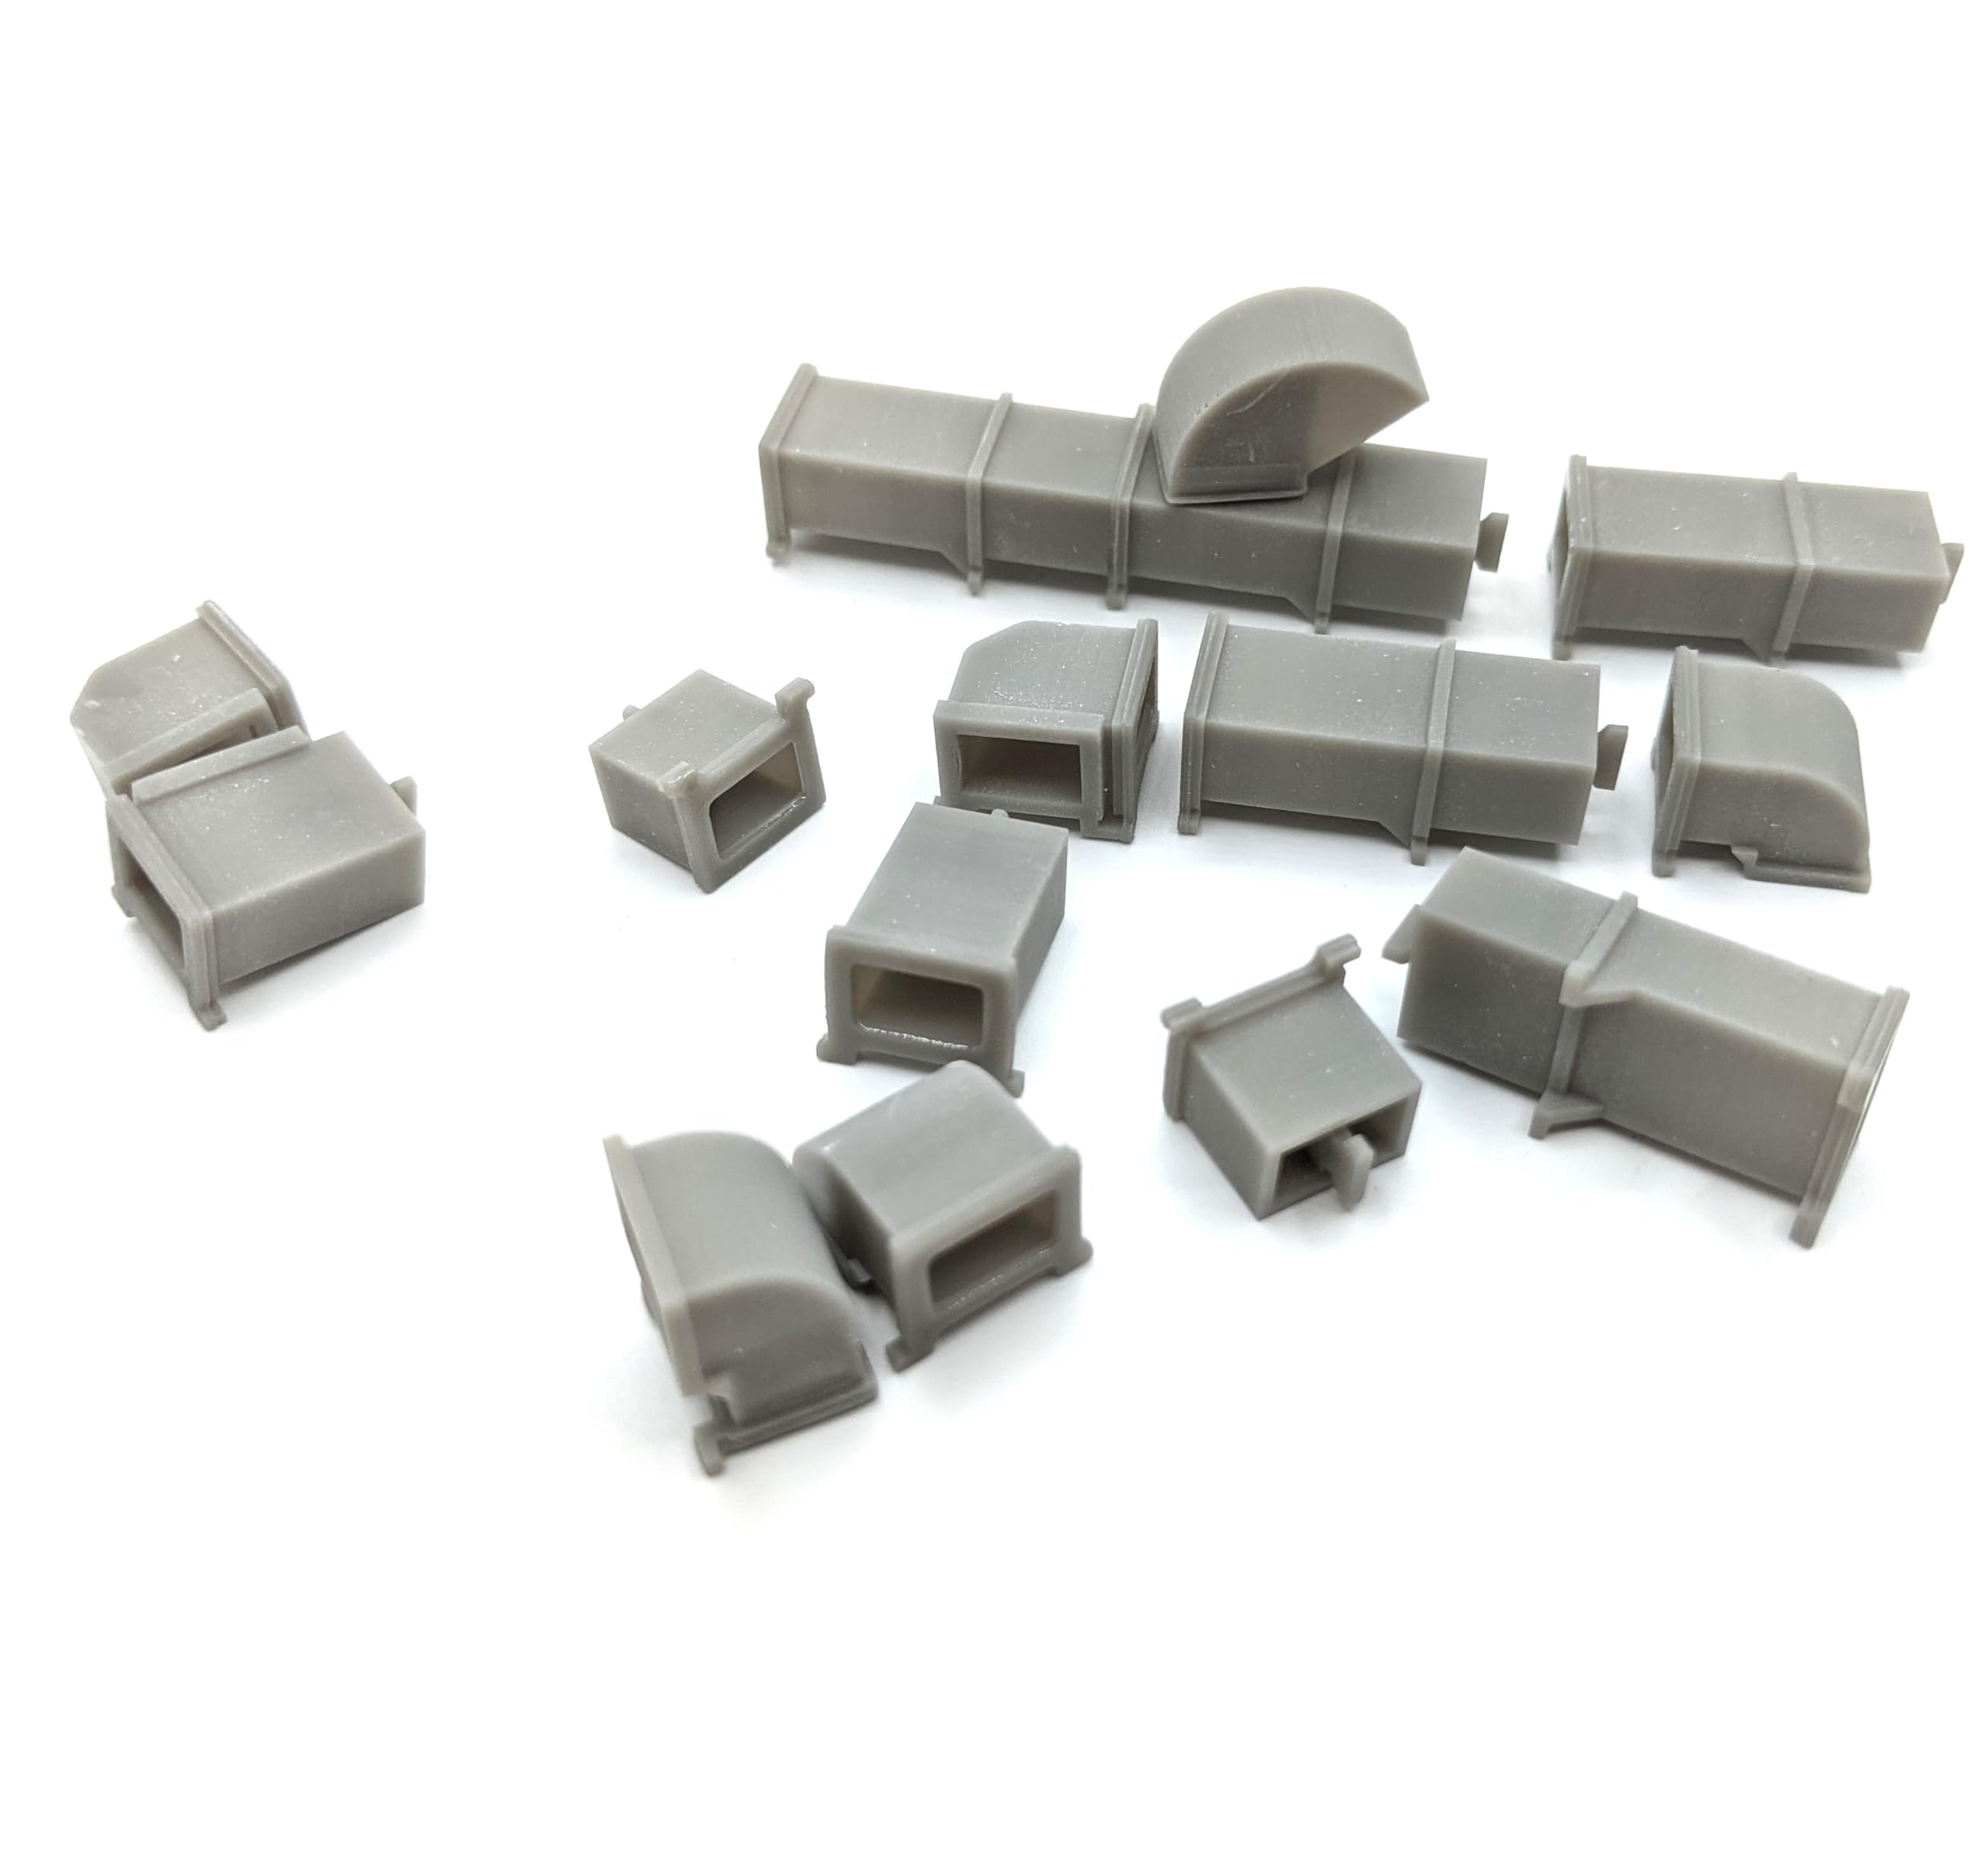 HO Scale Roof Details Air Conditioners Ductwork Roof Access Chimneys for Model Railroad Factory Buildings